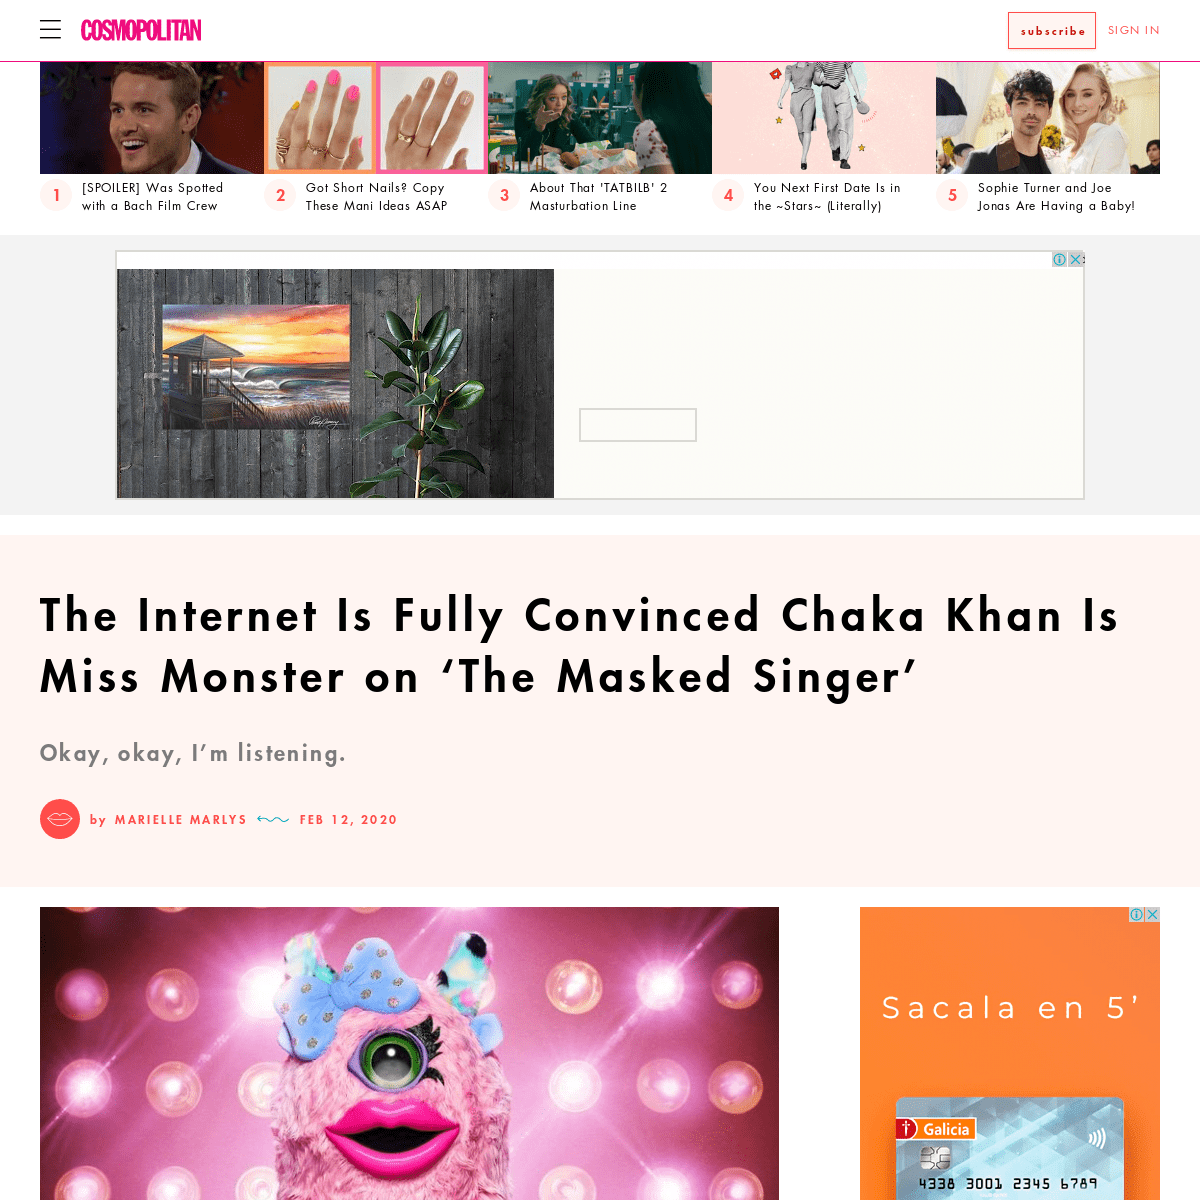 A complete backup of www.cosmopolitan.com/entertainment/tv/a30853988/miss-monster-masked-singer-season-3-predictions-theories/